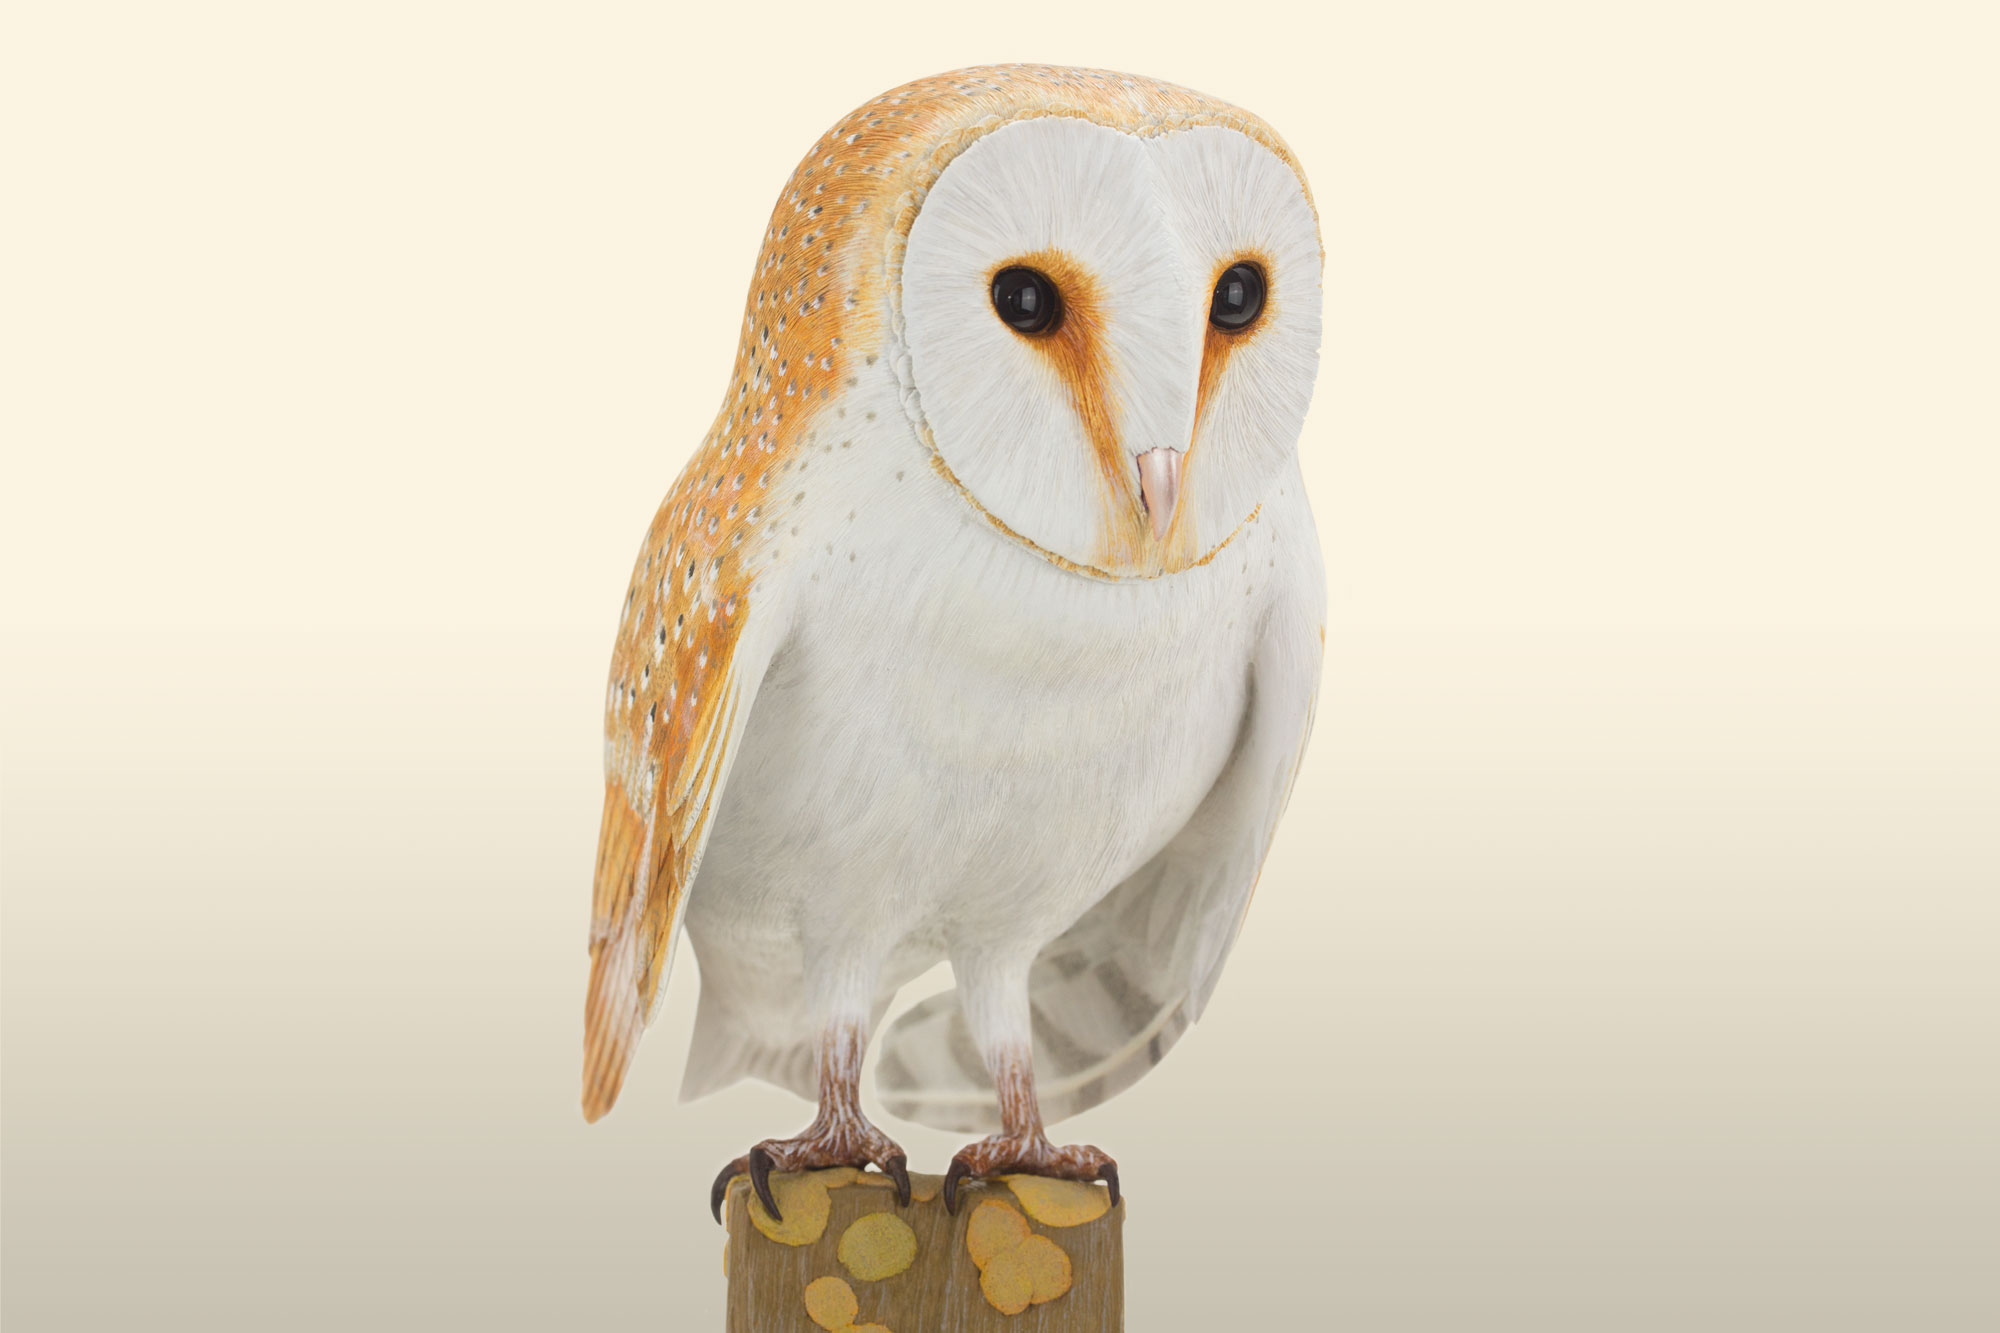 Barn owl bird carving, by Feathercarver David Patrick-Brown